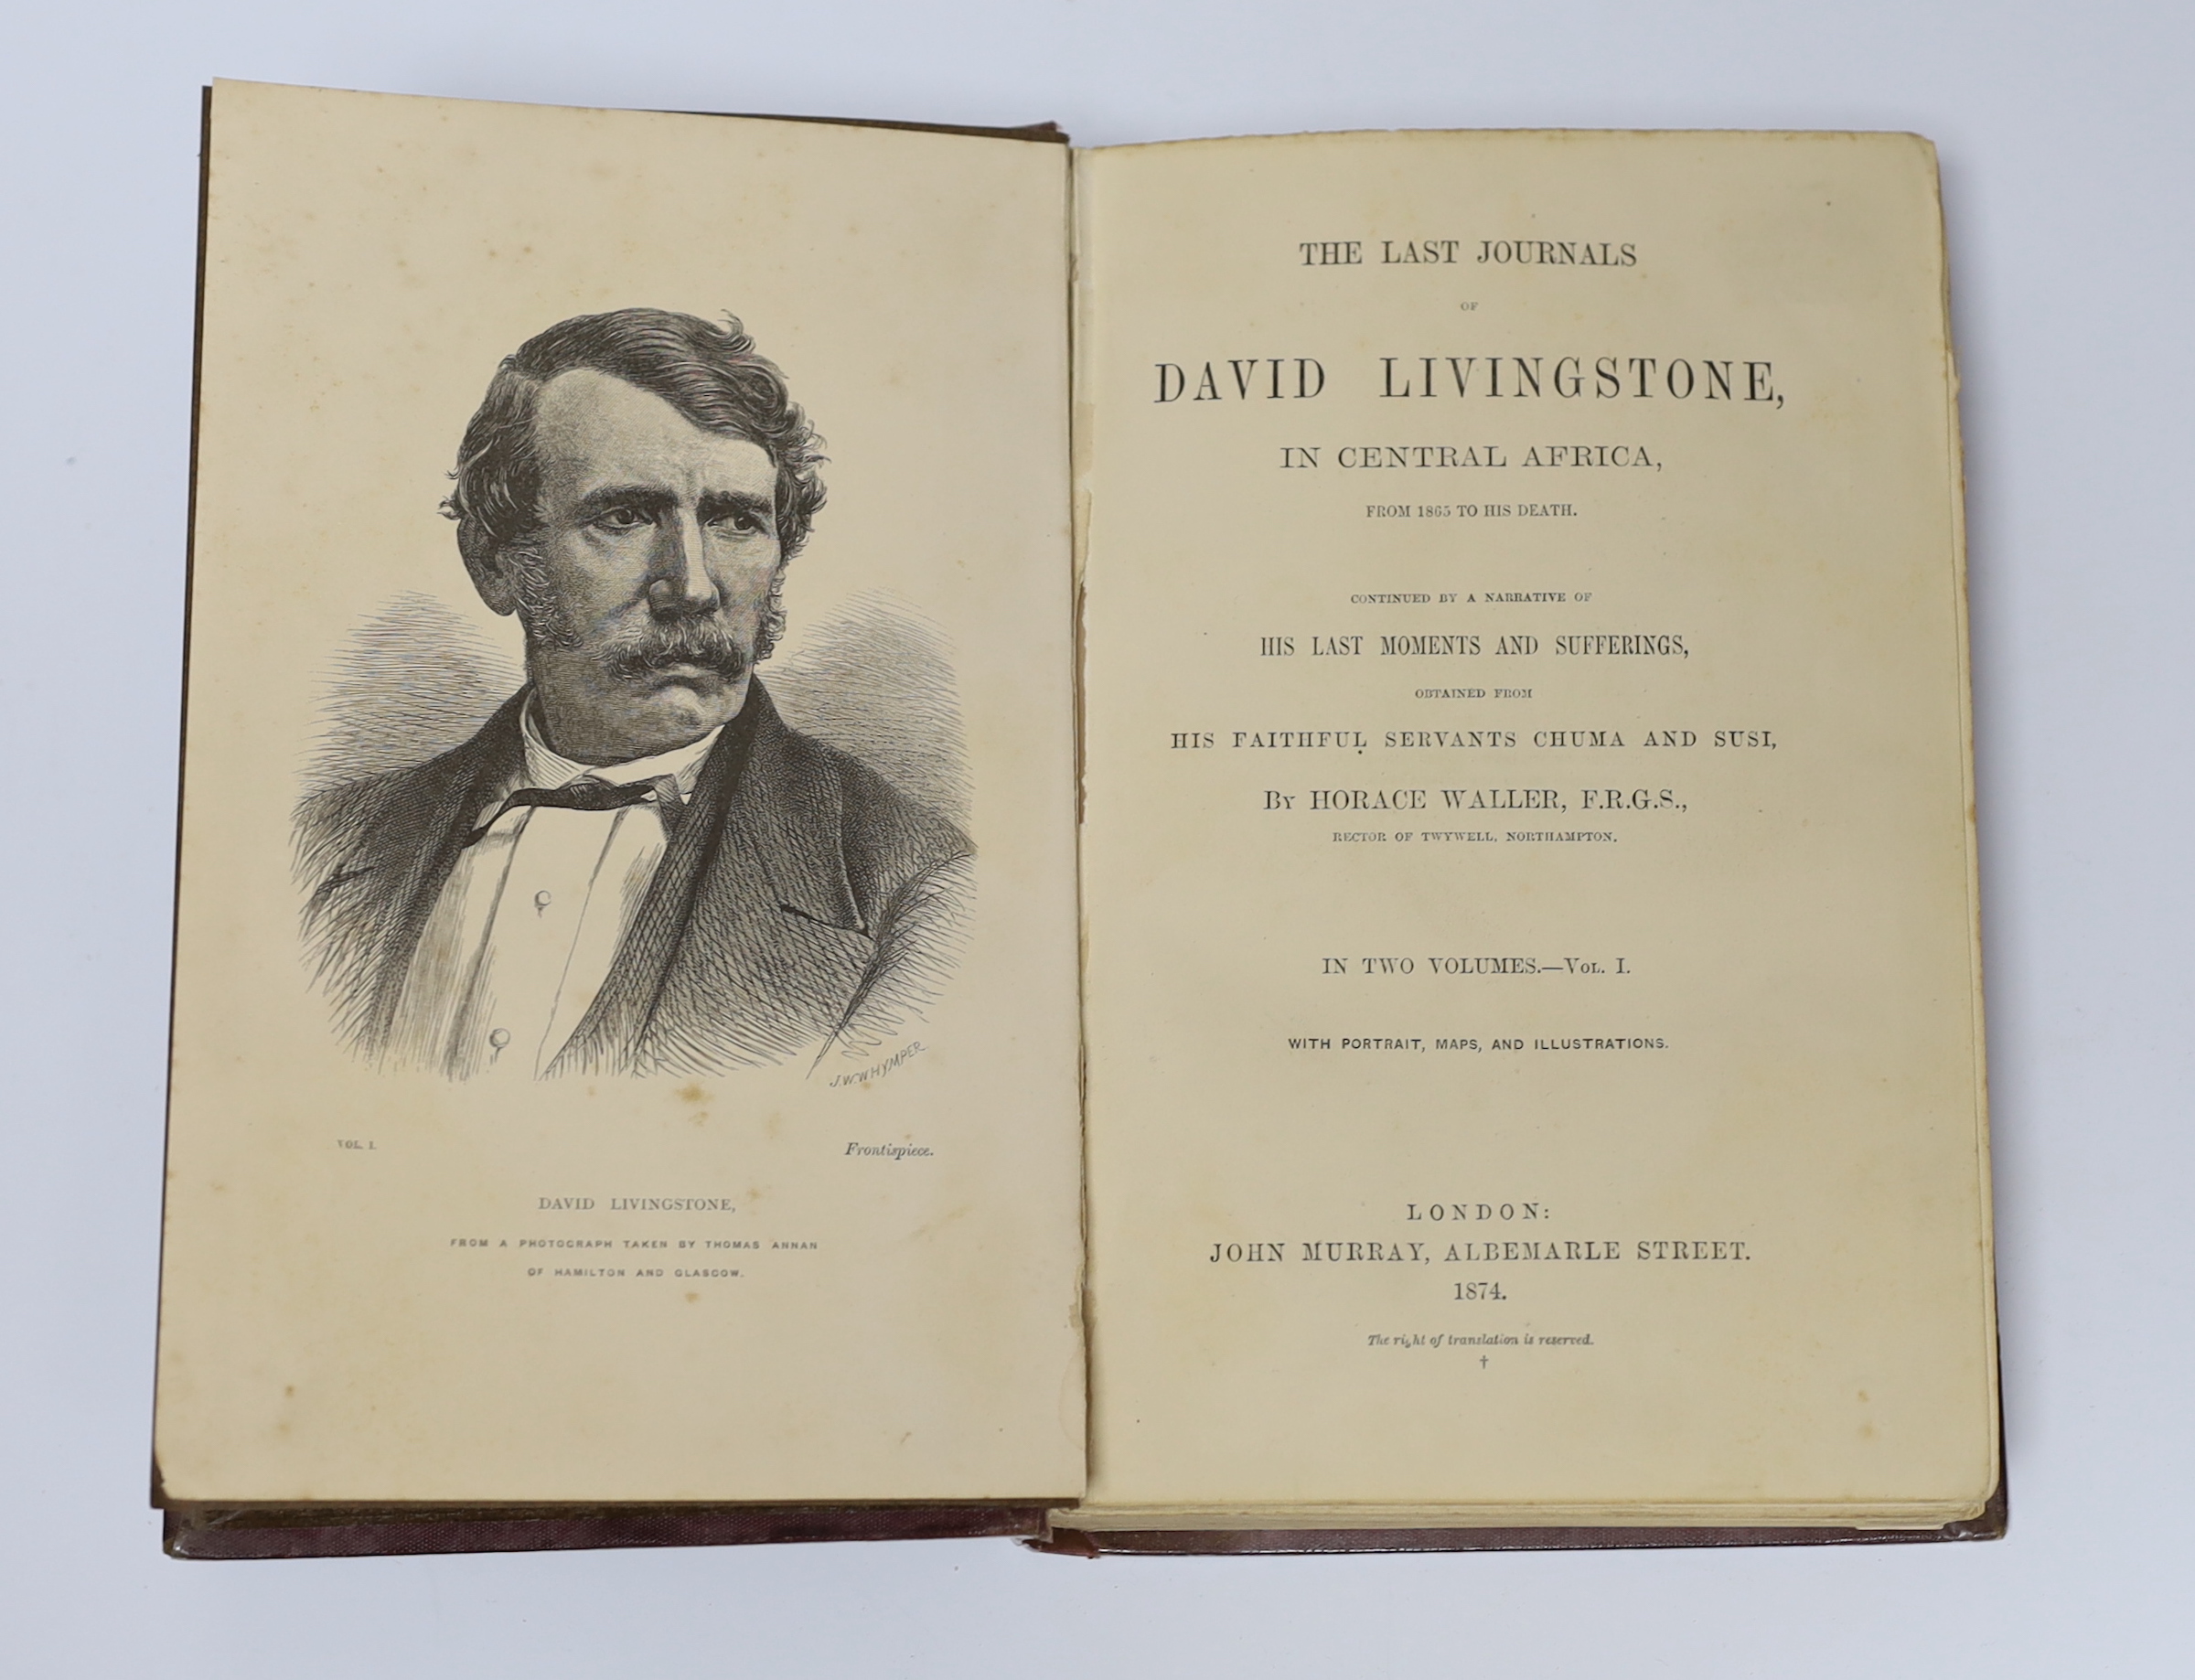 Livingstone, David - The Last Journals of David Livingstone, in Central Africa....continued by a narrative of his last moments and sufferings....by Horace Waller. Ist edition, 2 vols. portrait frontis. and 20 wood engrav